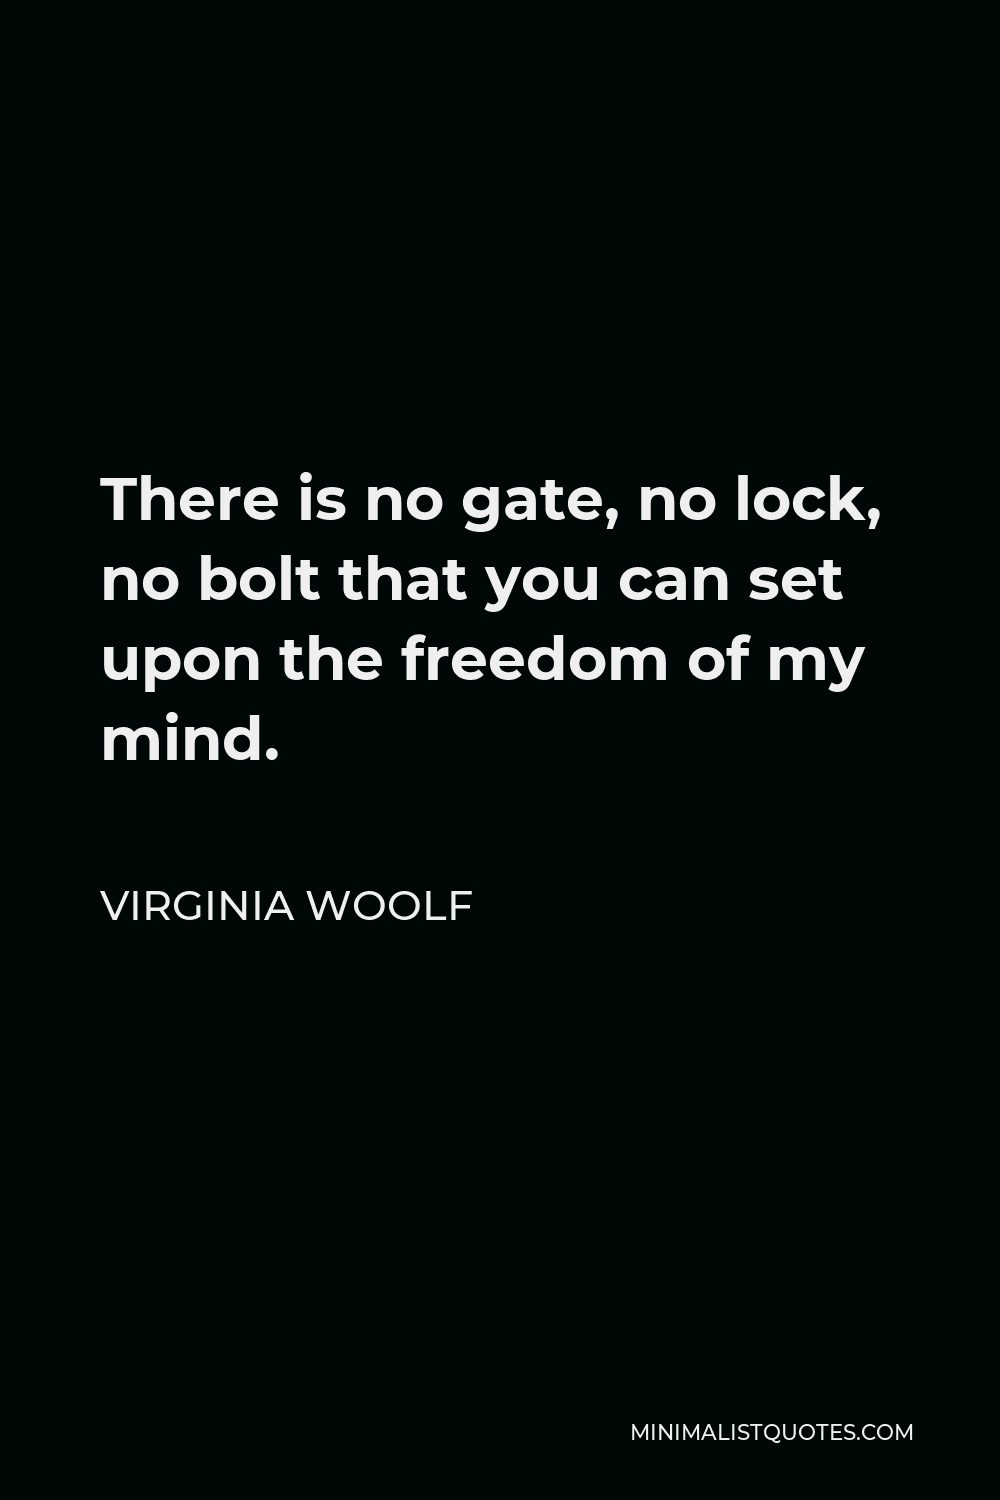 Virginia Woolf Quote - There is no gate, no lock, no bolt that you can set upon the freedom of my mind.